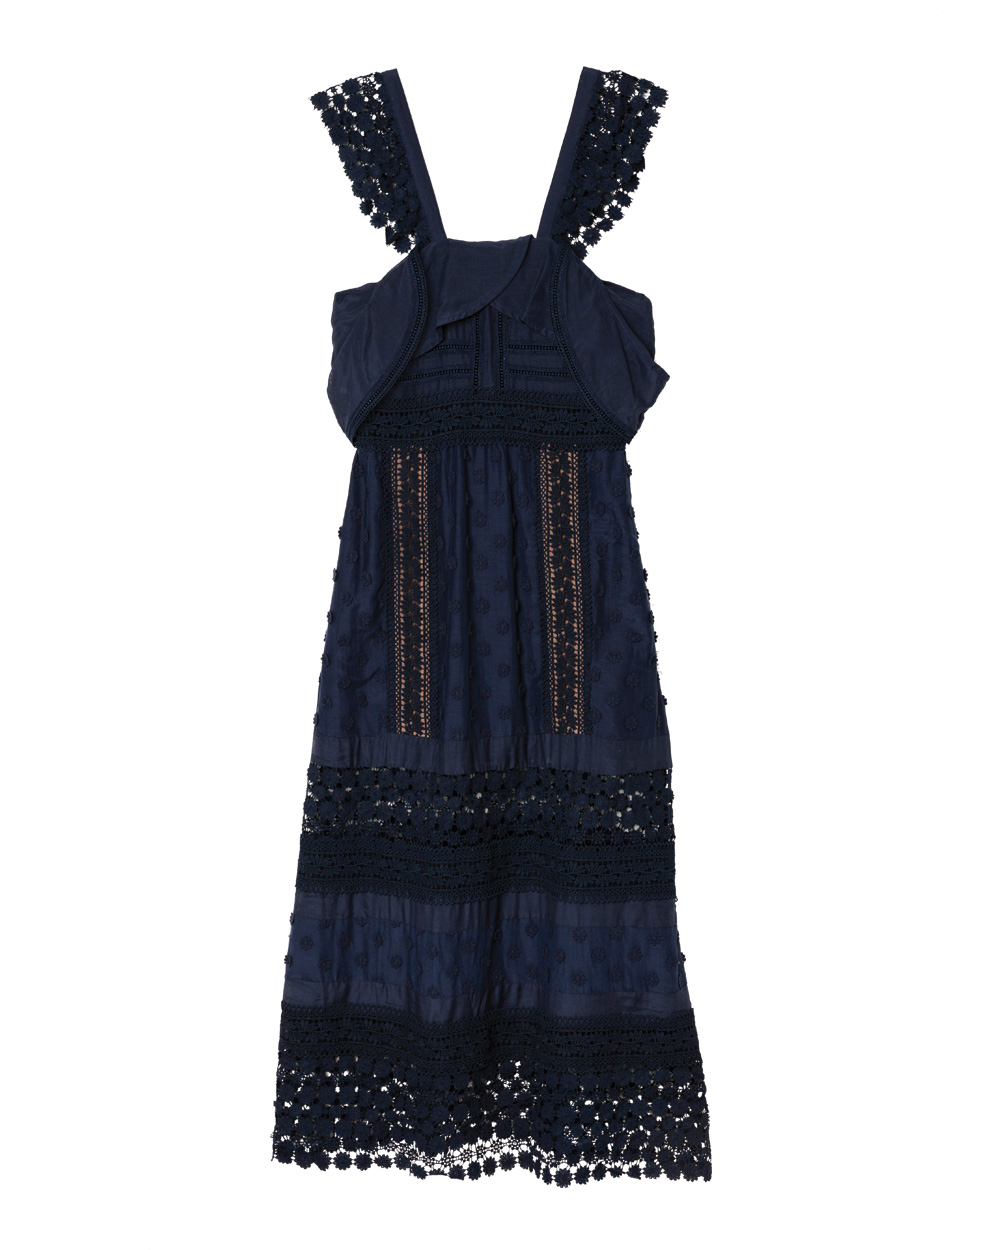 Self Portrait dress, $745, from Muse